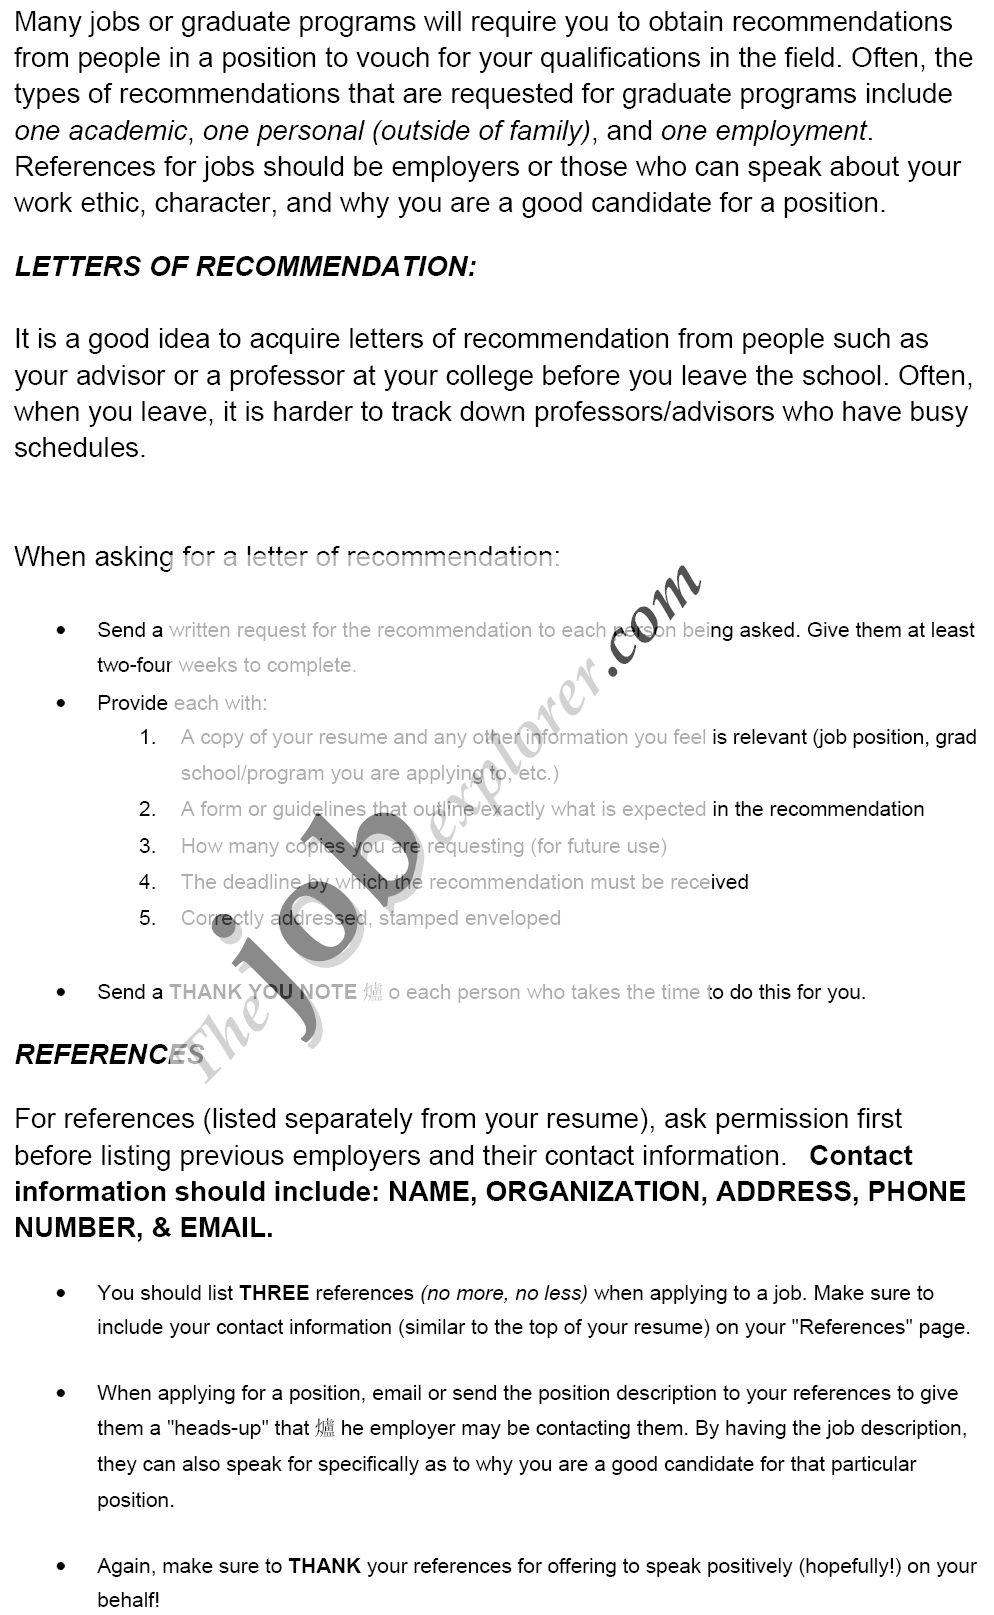 Sample Letter Of Recommendation For Masters Program From Employer from www.thejobexplorer.com